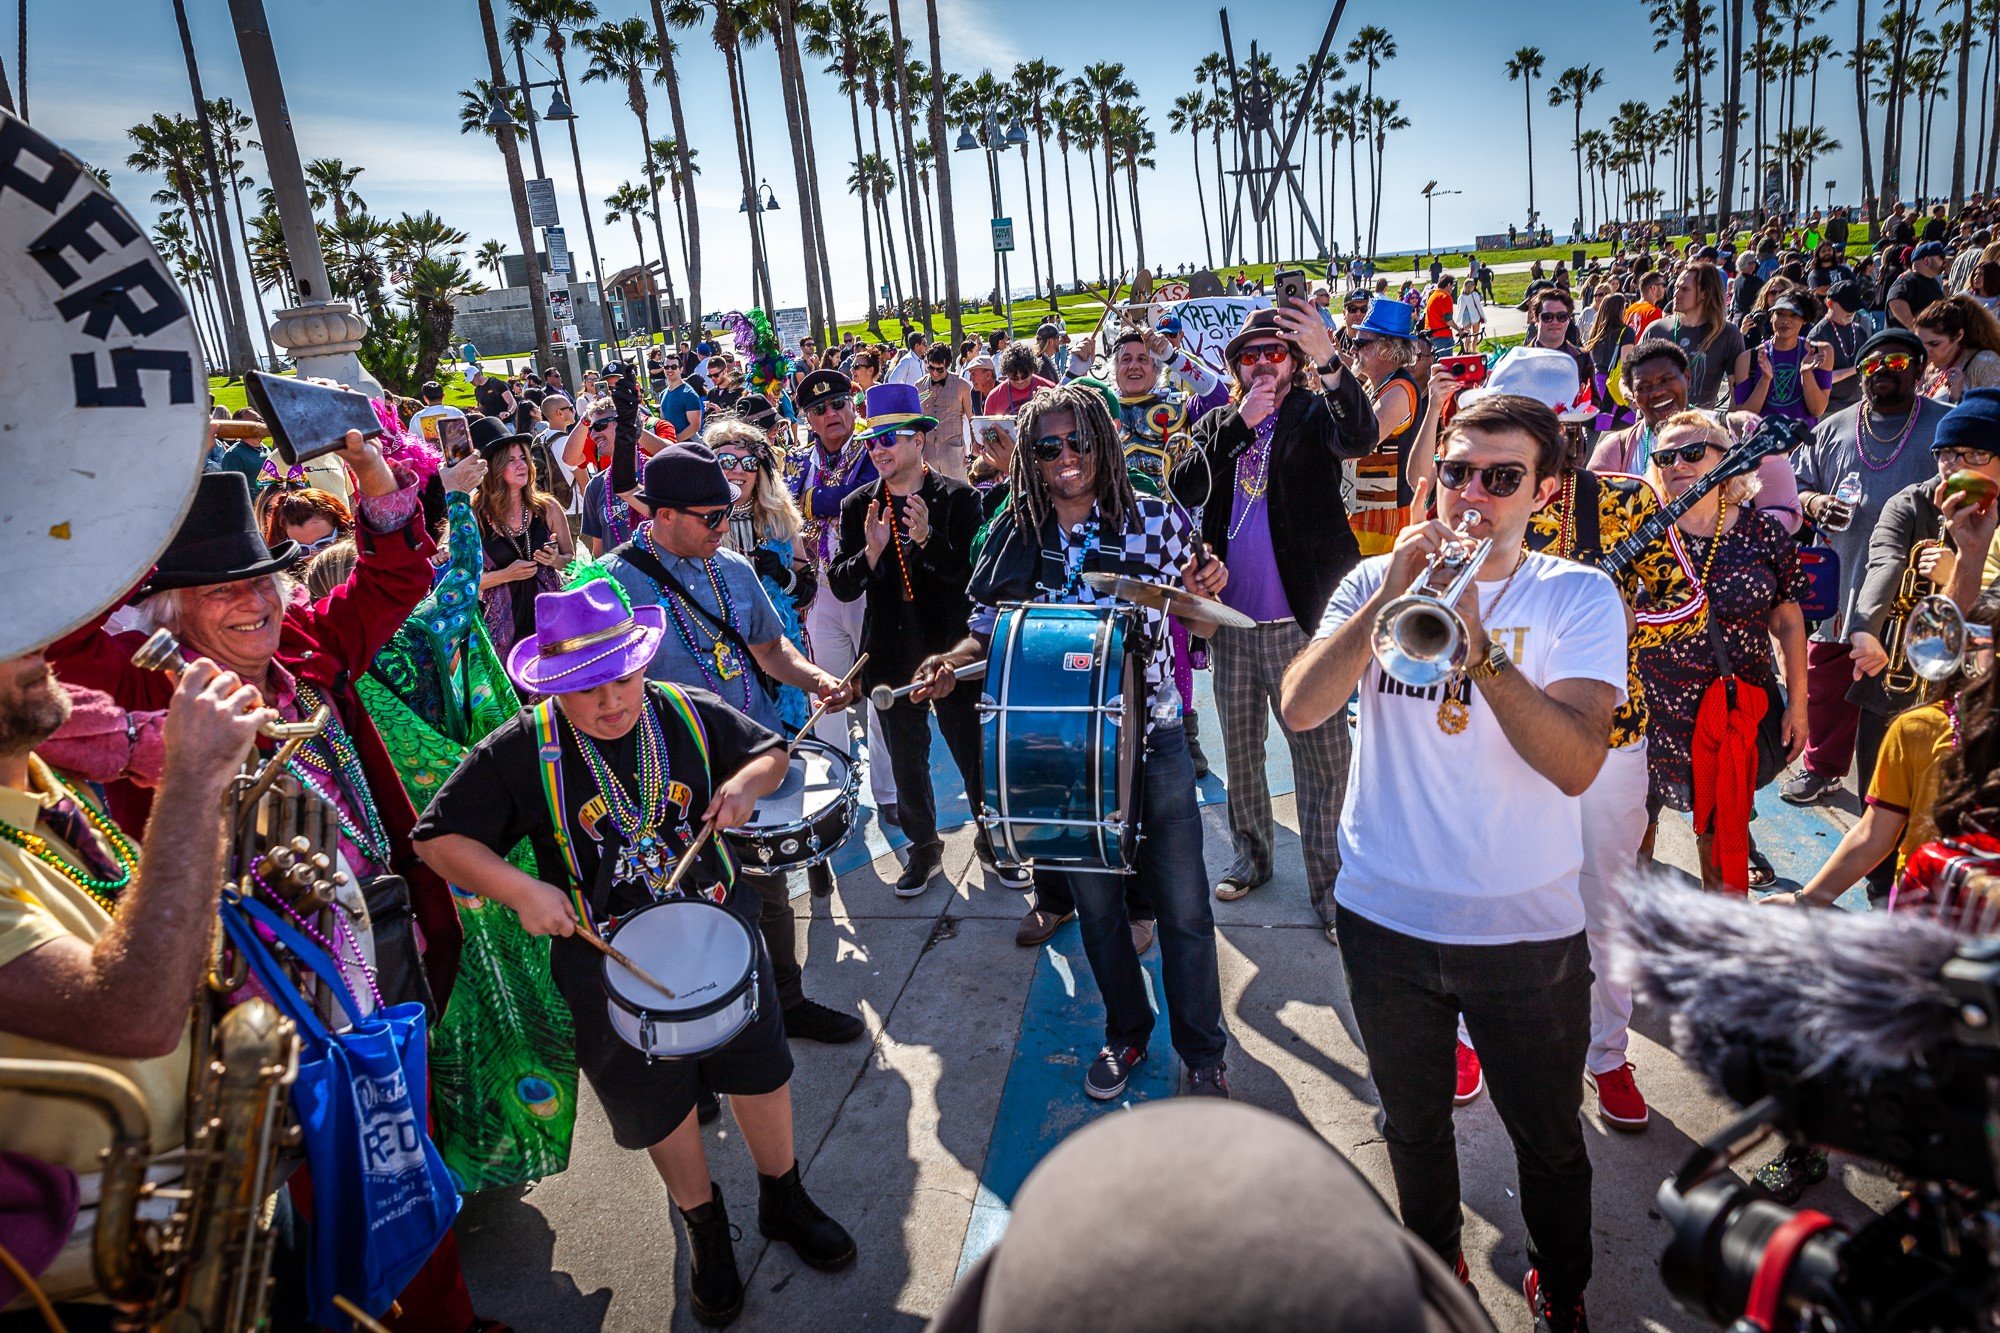 Hollywood Highsteppers Brass Band